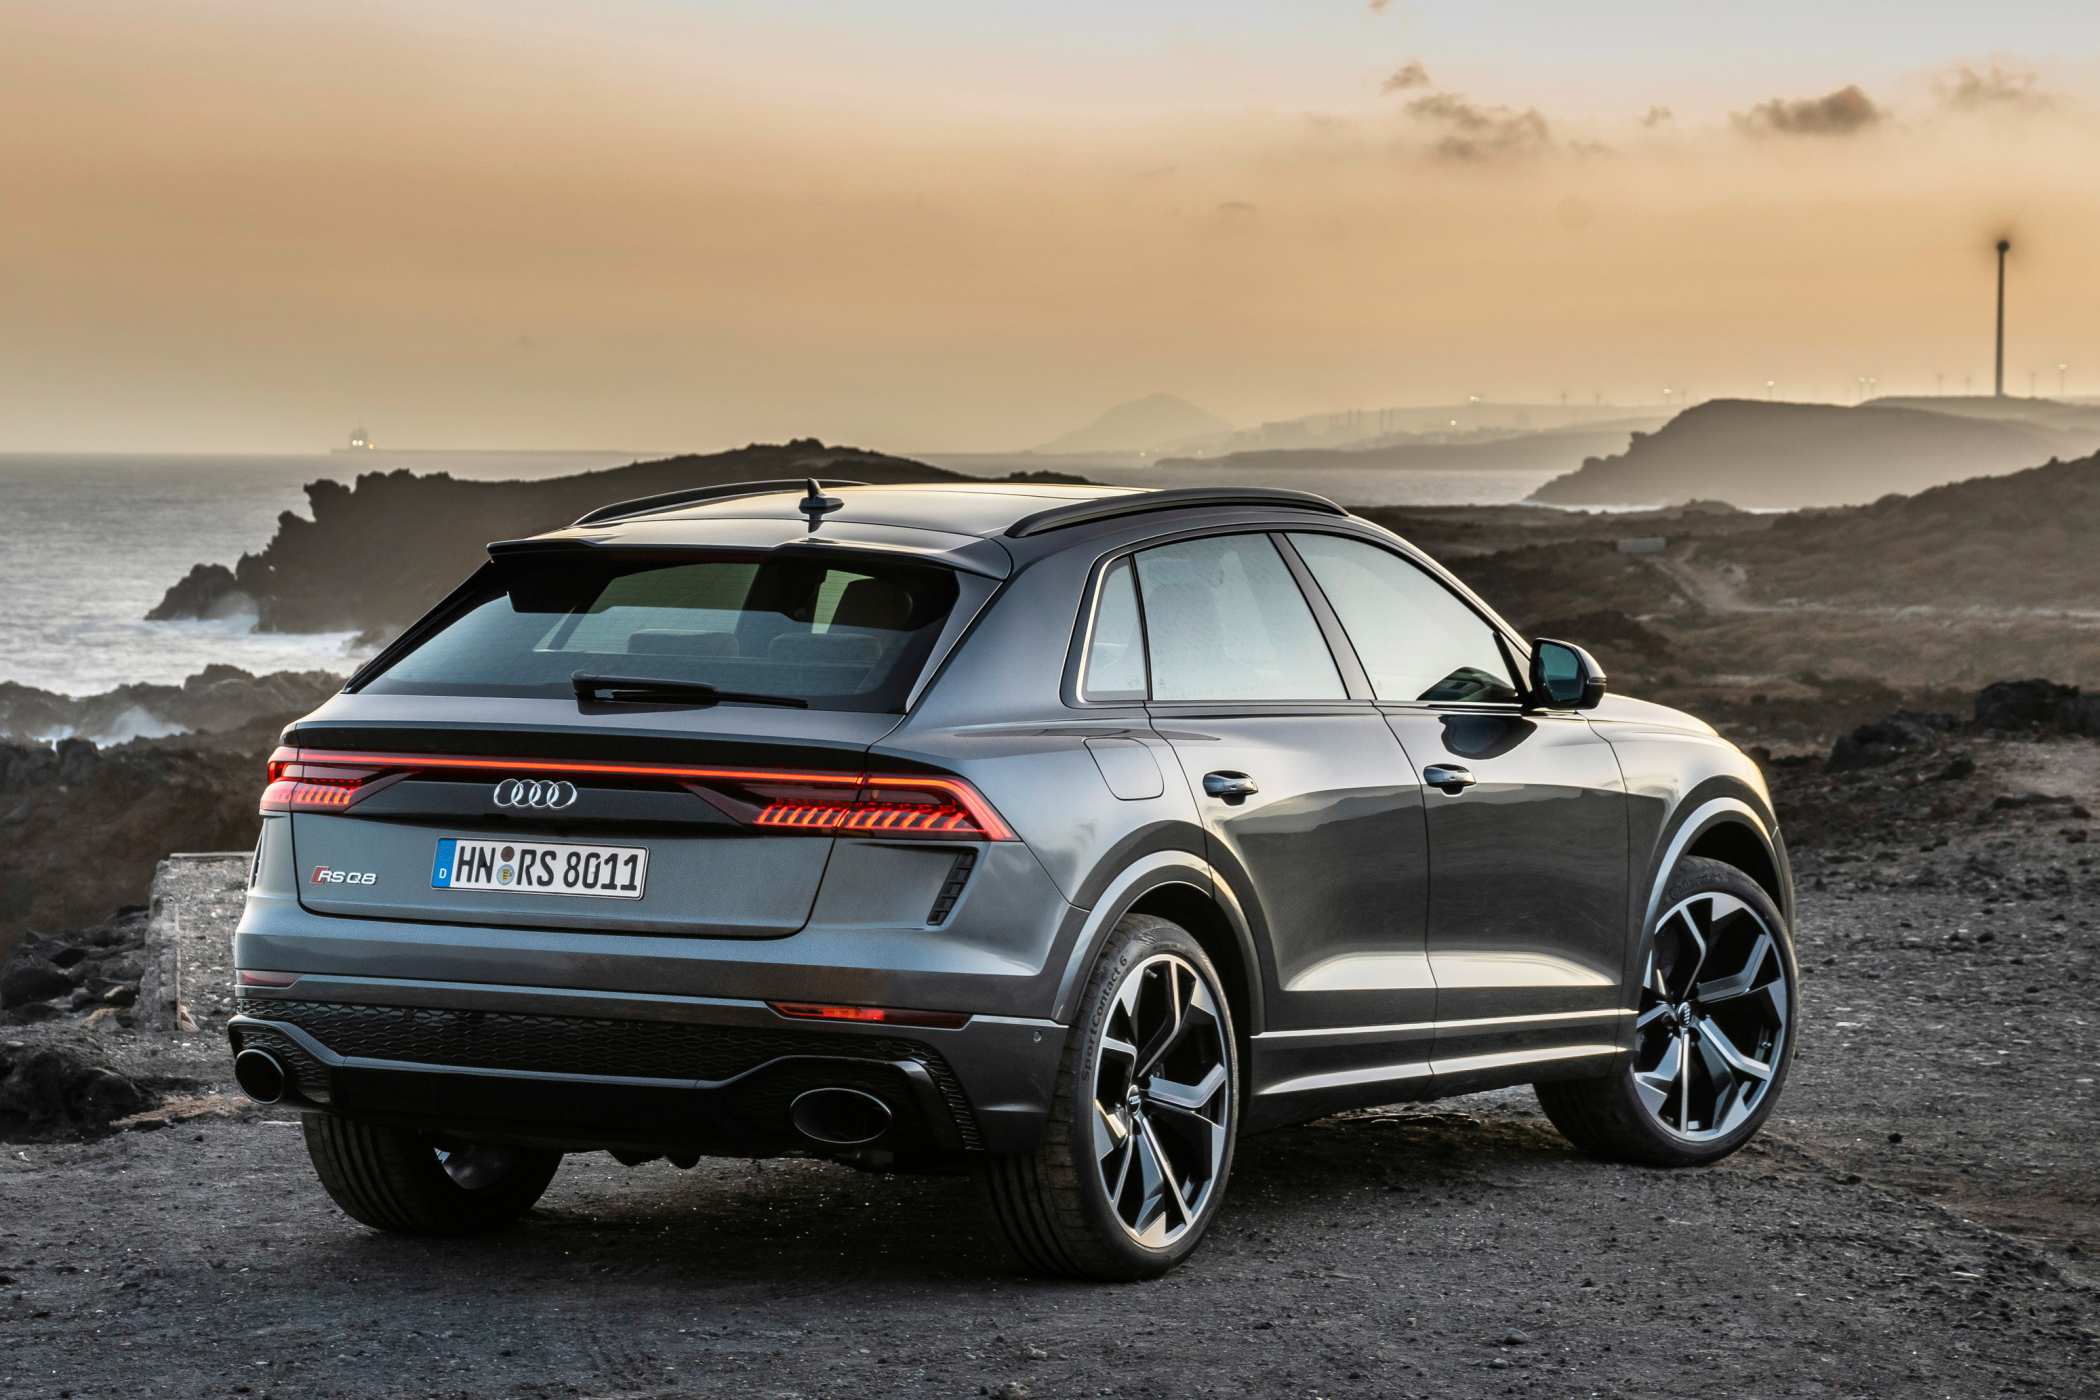 The all-new Audi RS Q8 will arrive in October for first customer deliveries.